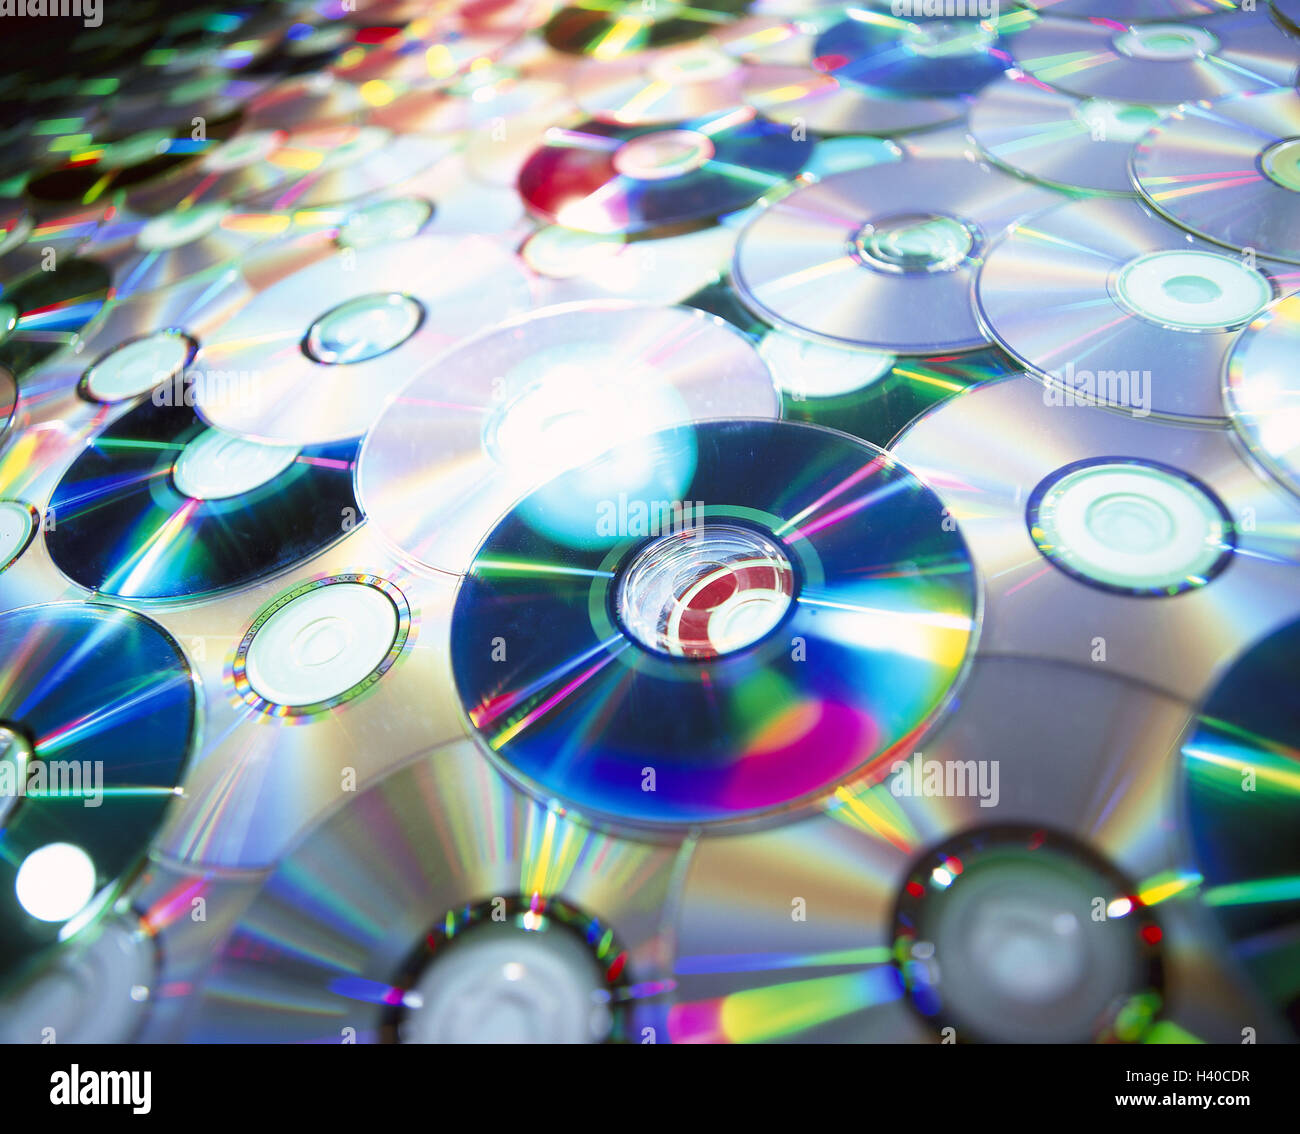 CDs, differently, close up, CD-ROM, multimedia, CD, storage medium, data memory, data carrier, compact disc, Read only memory, colourfully, passed away, save detail, product photography, Still life, CD-ROMs, Compact Discs, compact discs, CD-ROM, DVD, data carrier, storage media, sound carriers, information, data, digitally, audio, video, Still life, product photography, background Stock Photo